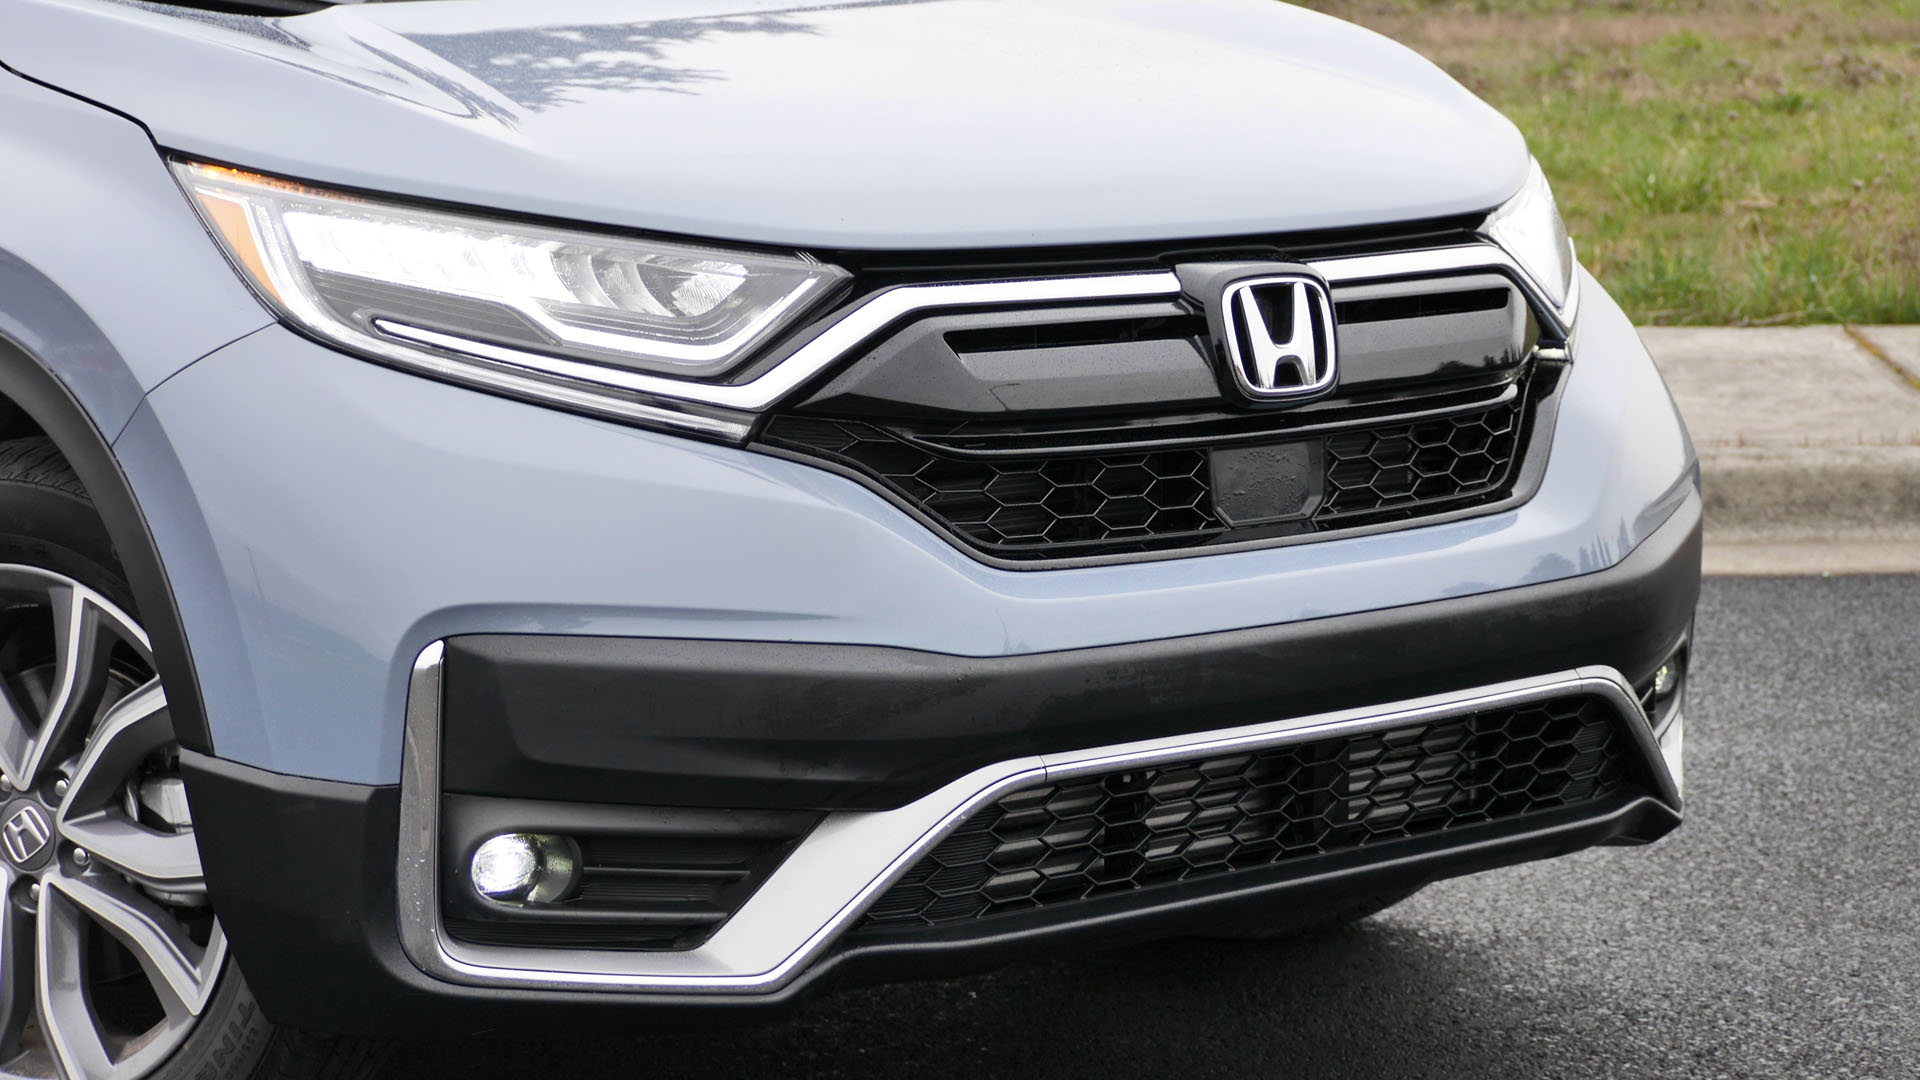 2021 Honda Cr V Review Whats New Price Safety Fuel Economy